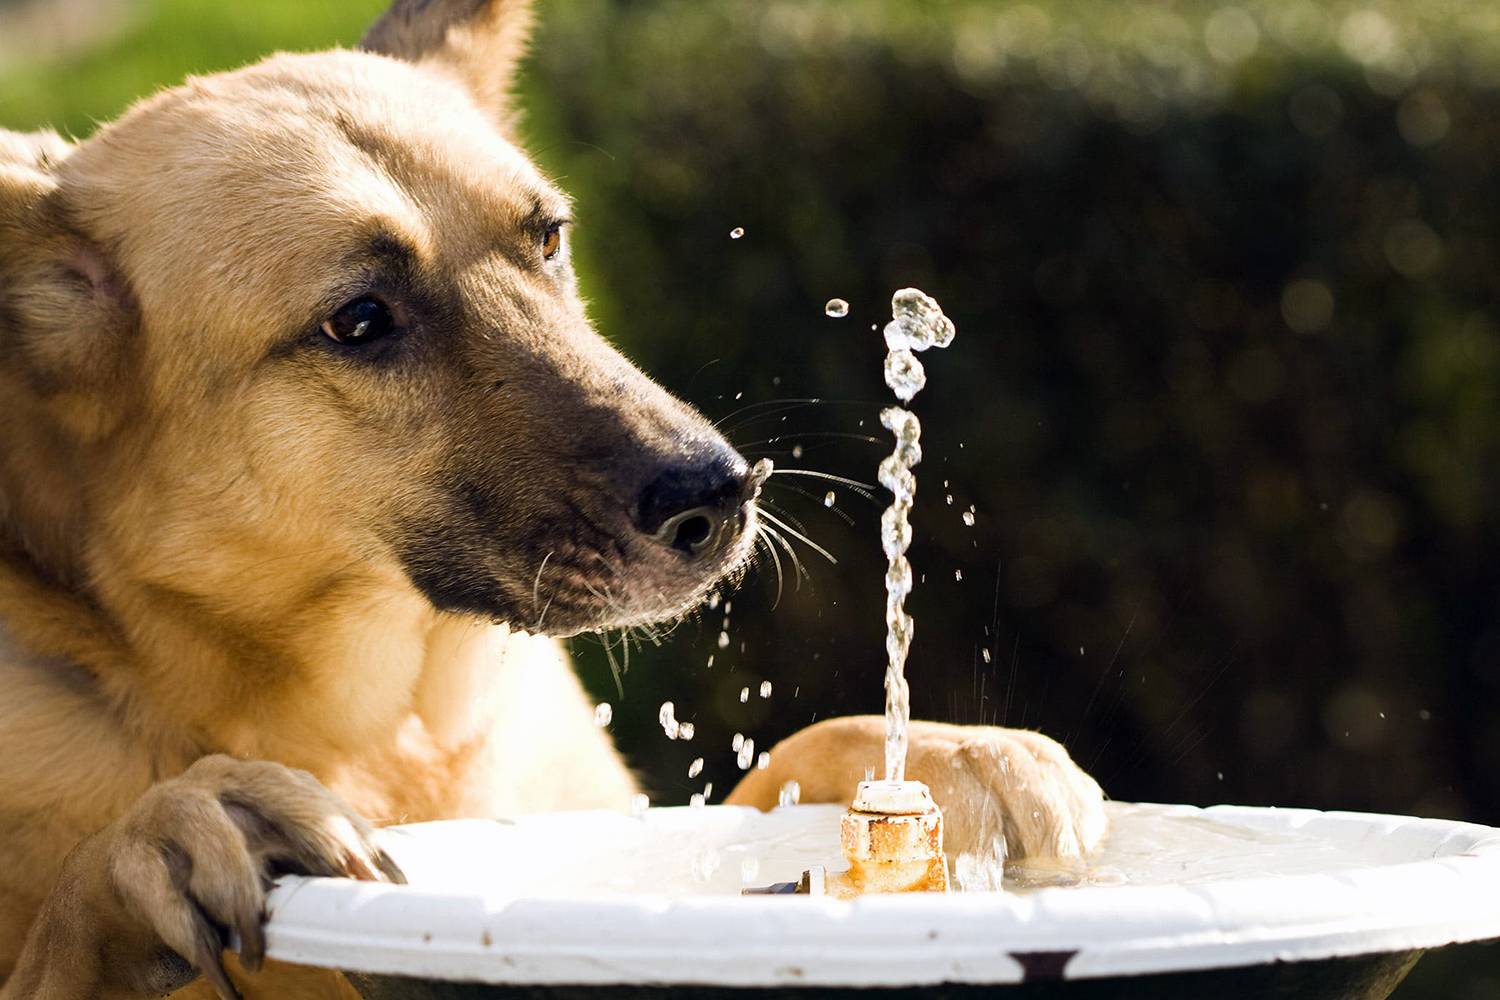 do dogs stop eating in hot weather